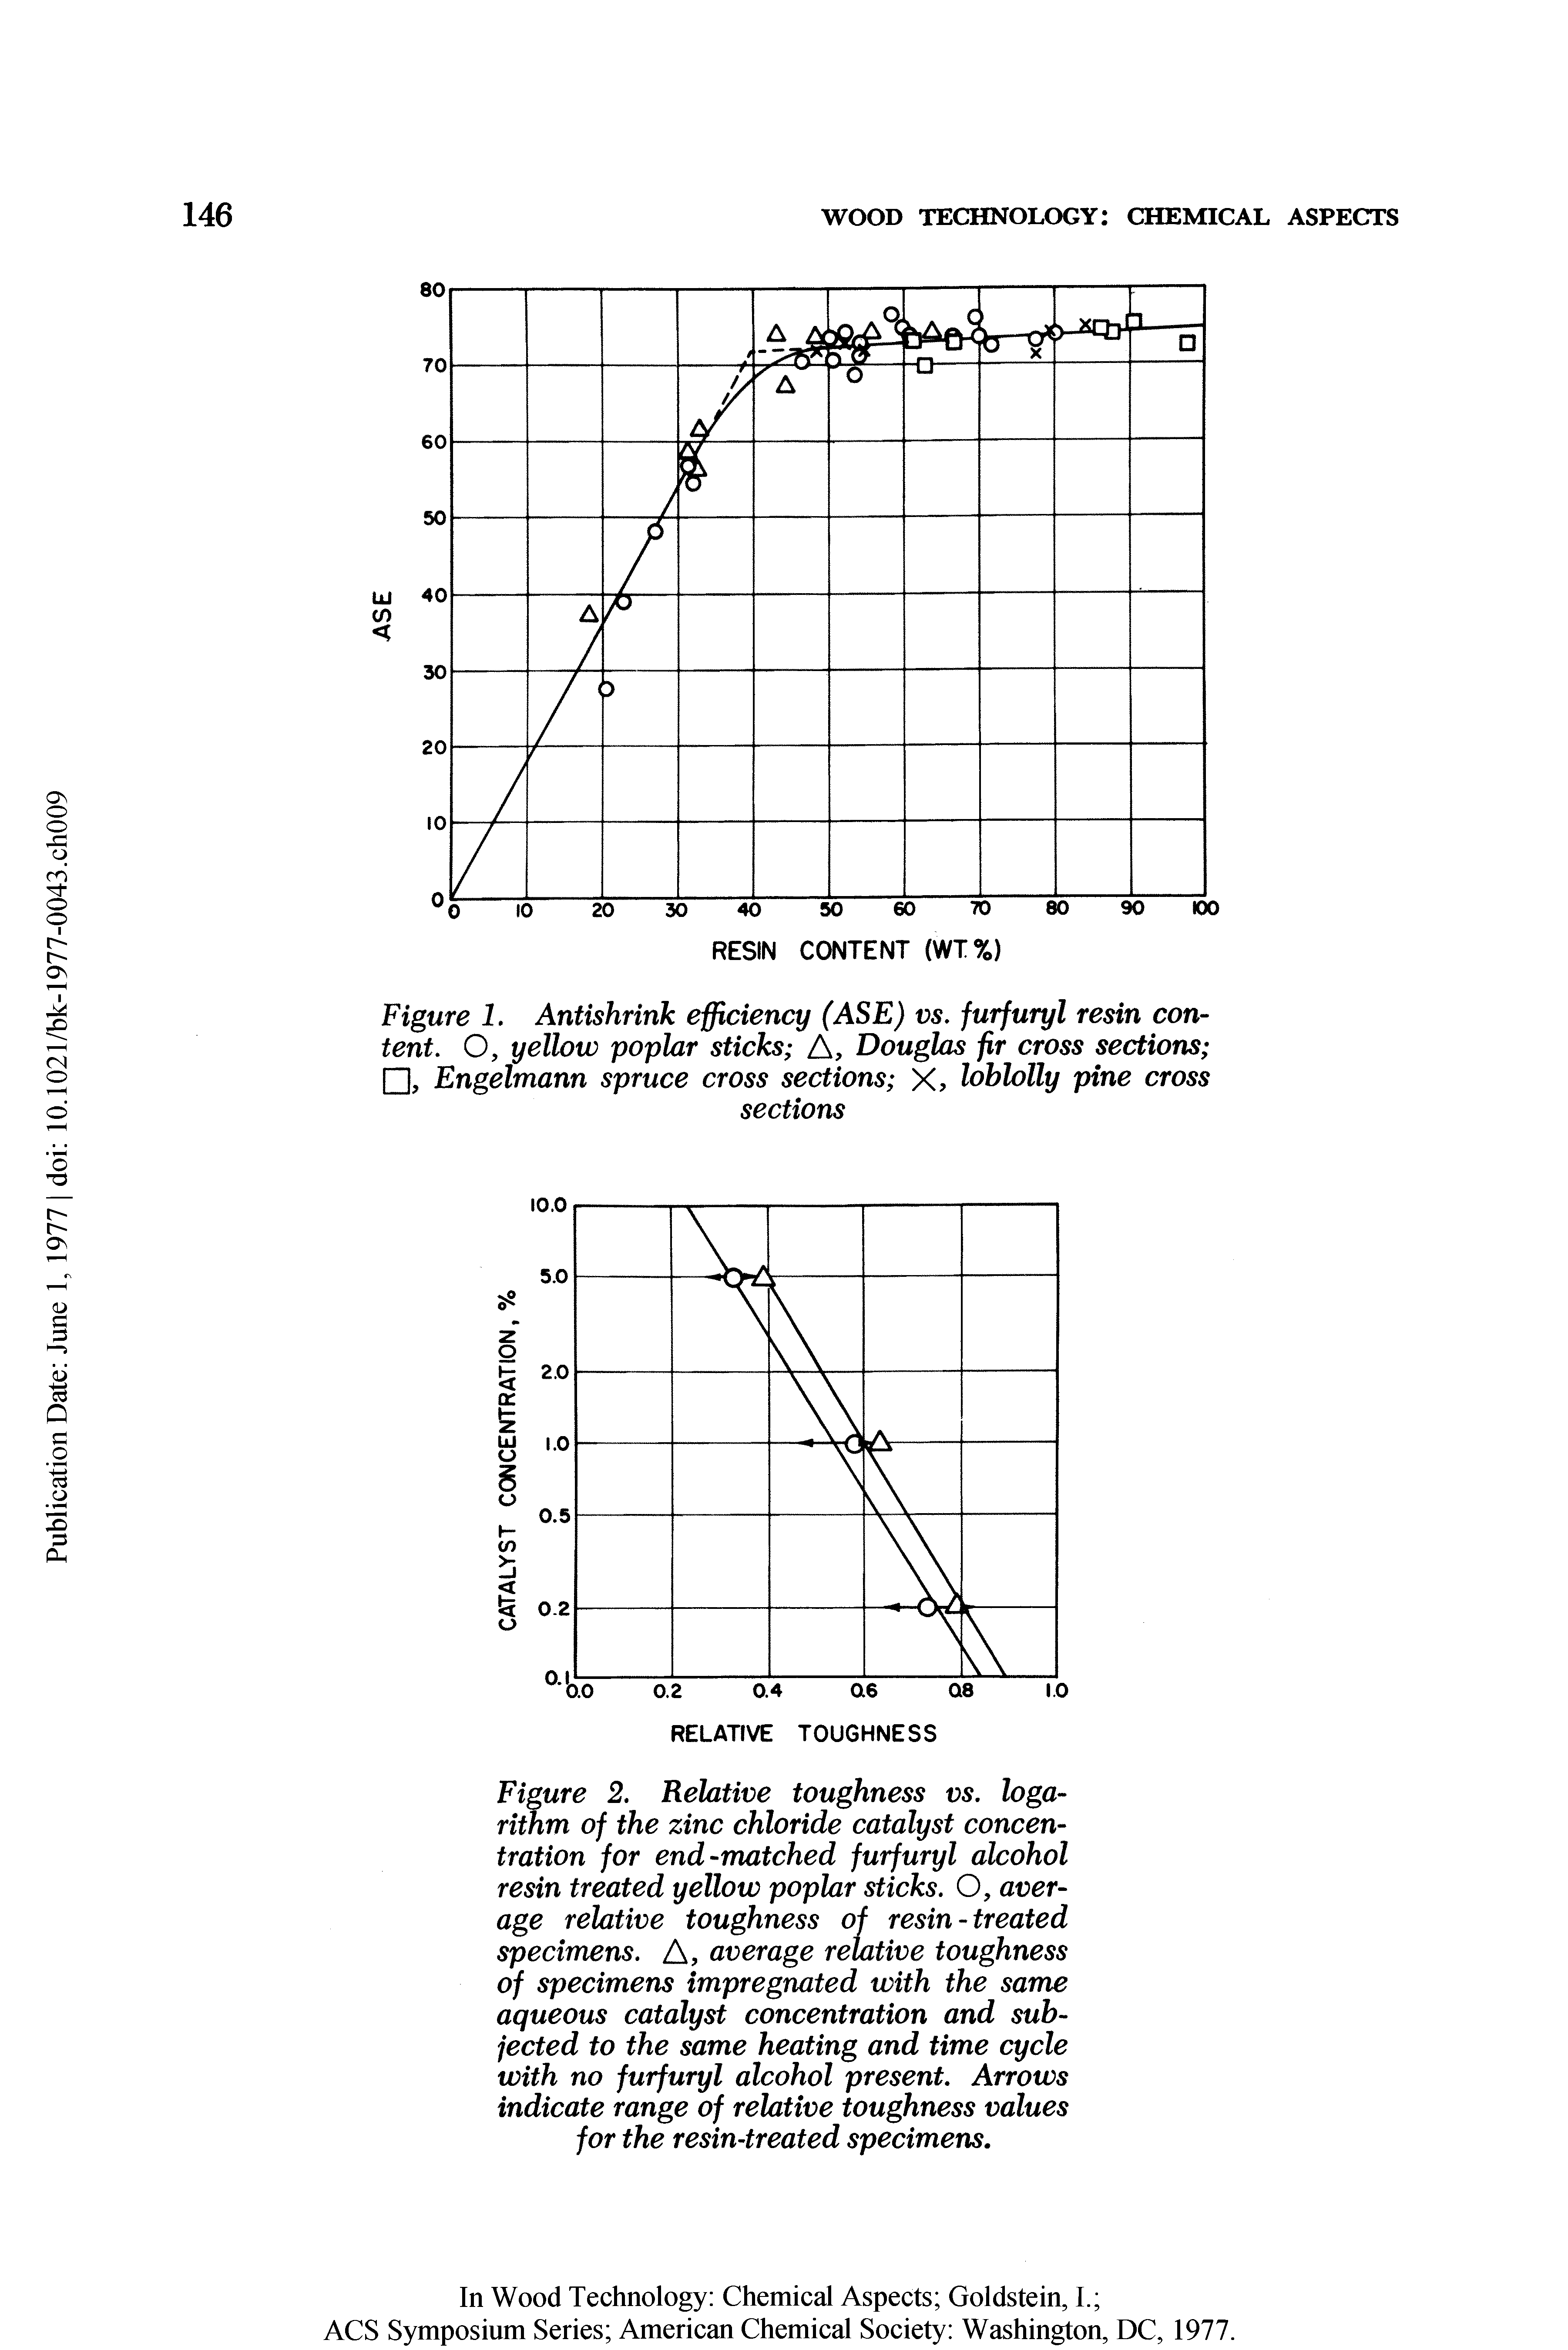 Figure 2. Relative toughness vs. logarithm of the zinc chloride catalyst concentration for end-matched furfuryl alcohol resin treated yellow poplar sticks. O, average relative toughness of resin-treated specimens. A, average relative toughness of specimens impregnated with the same aqueous catalyst concentration and subjected to the same heating and time cycle with no furfuryl alcohol present. Arrows indicate range of relative toughness values for the resin-treated specimens.